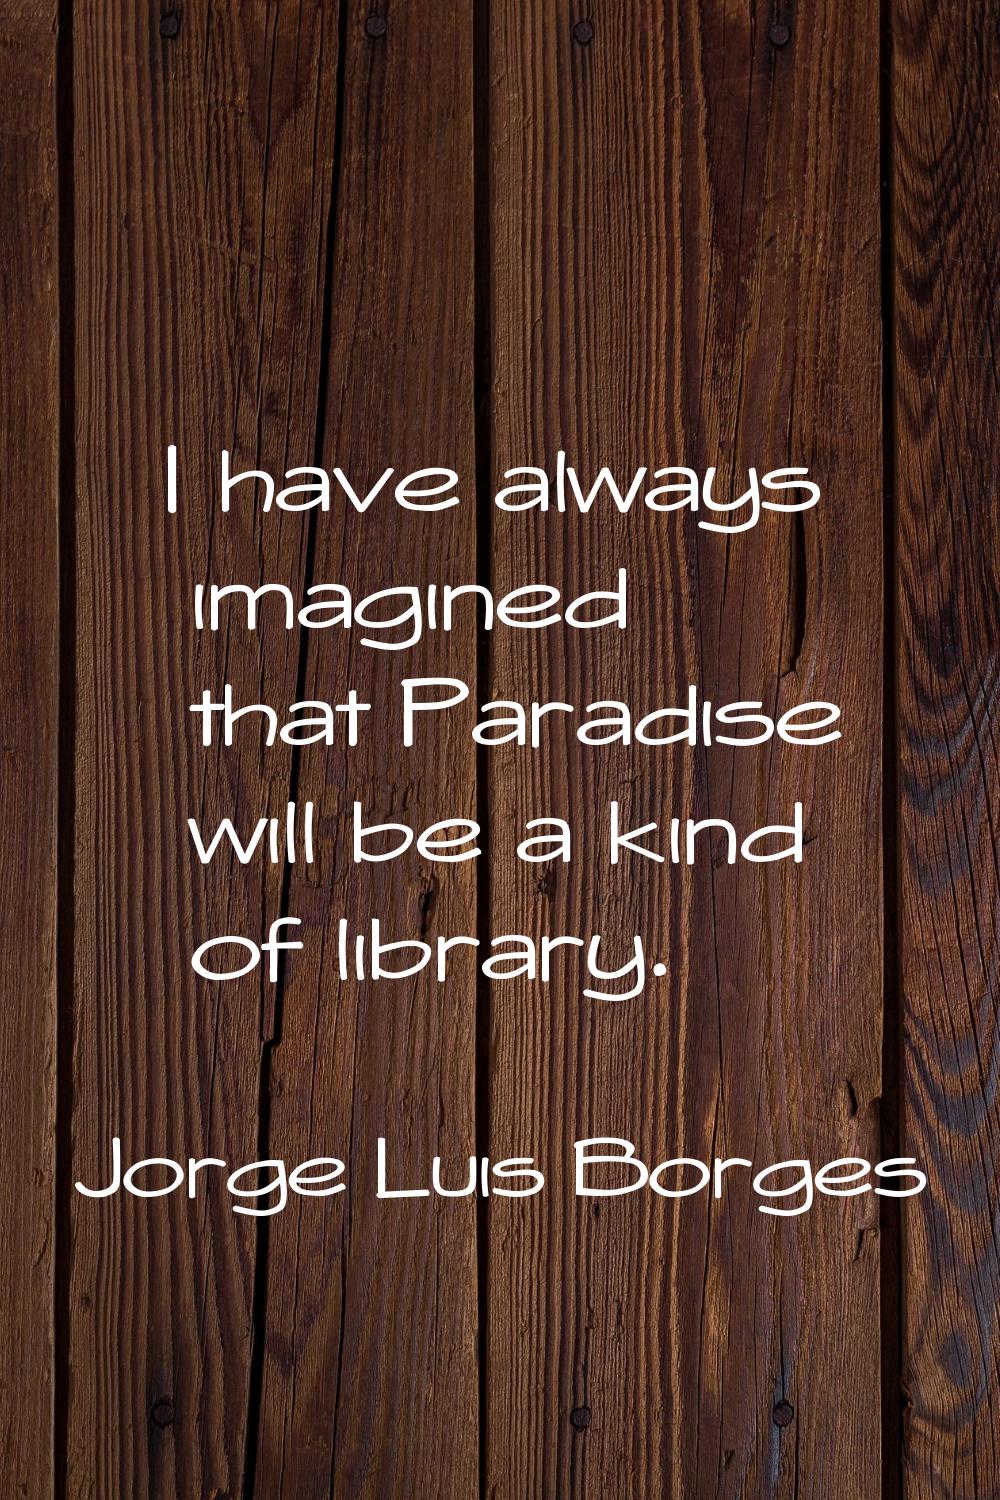 I have always imagined that Paradise will be a kind of library.